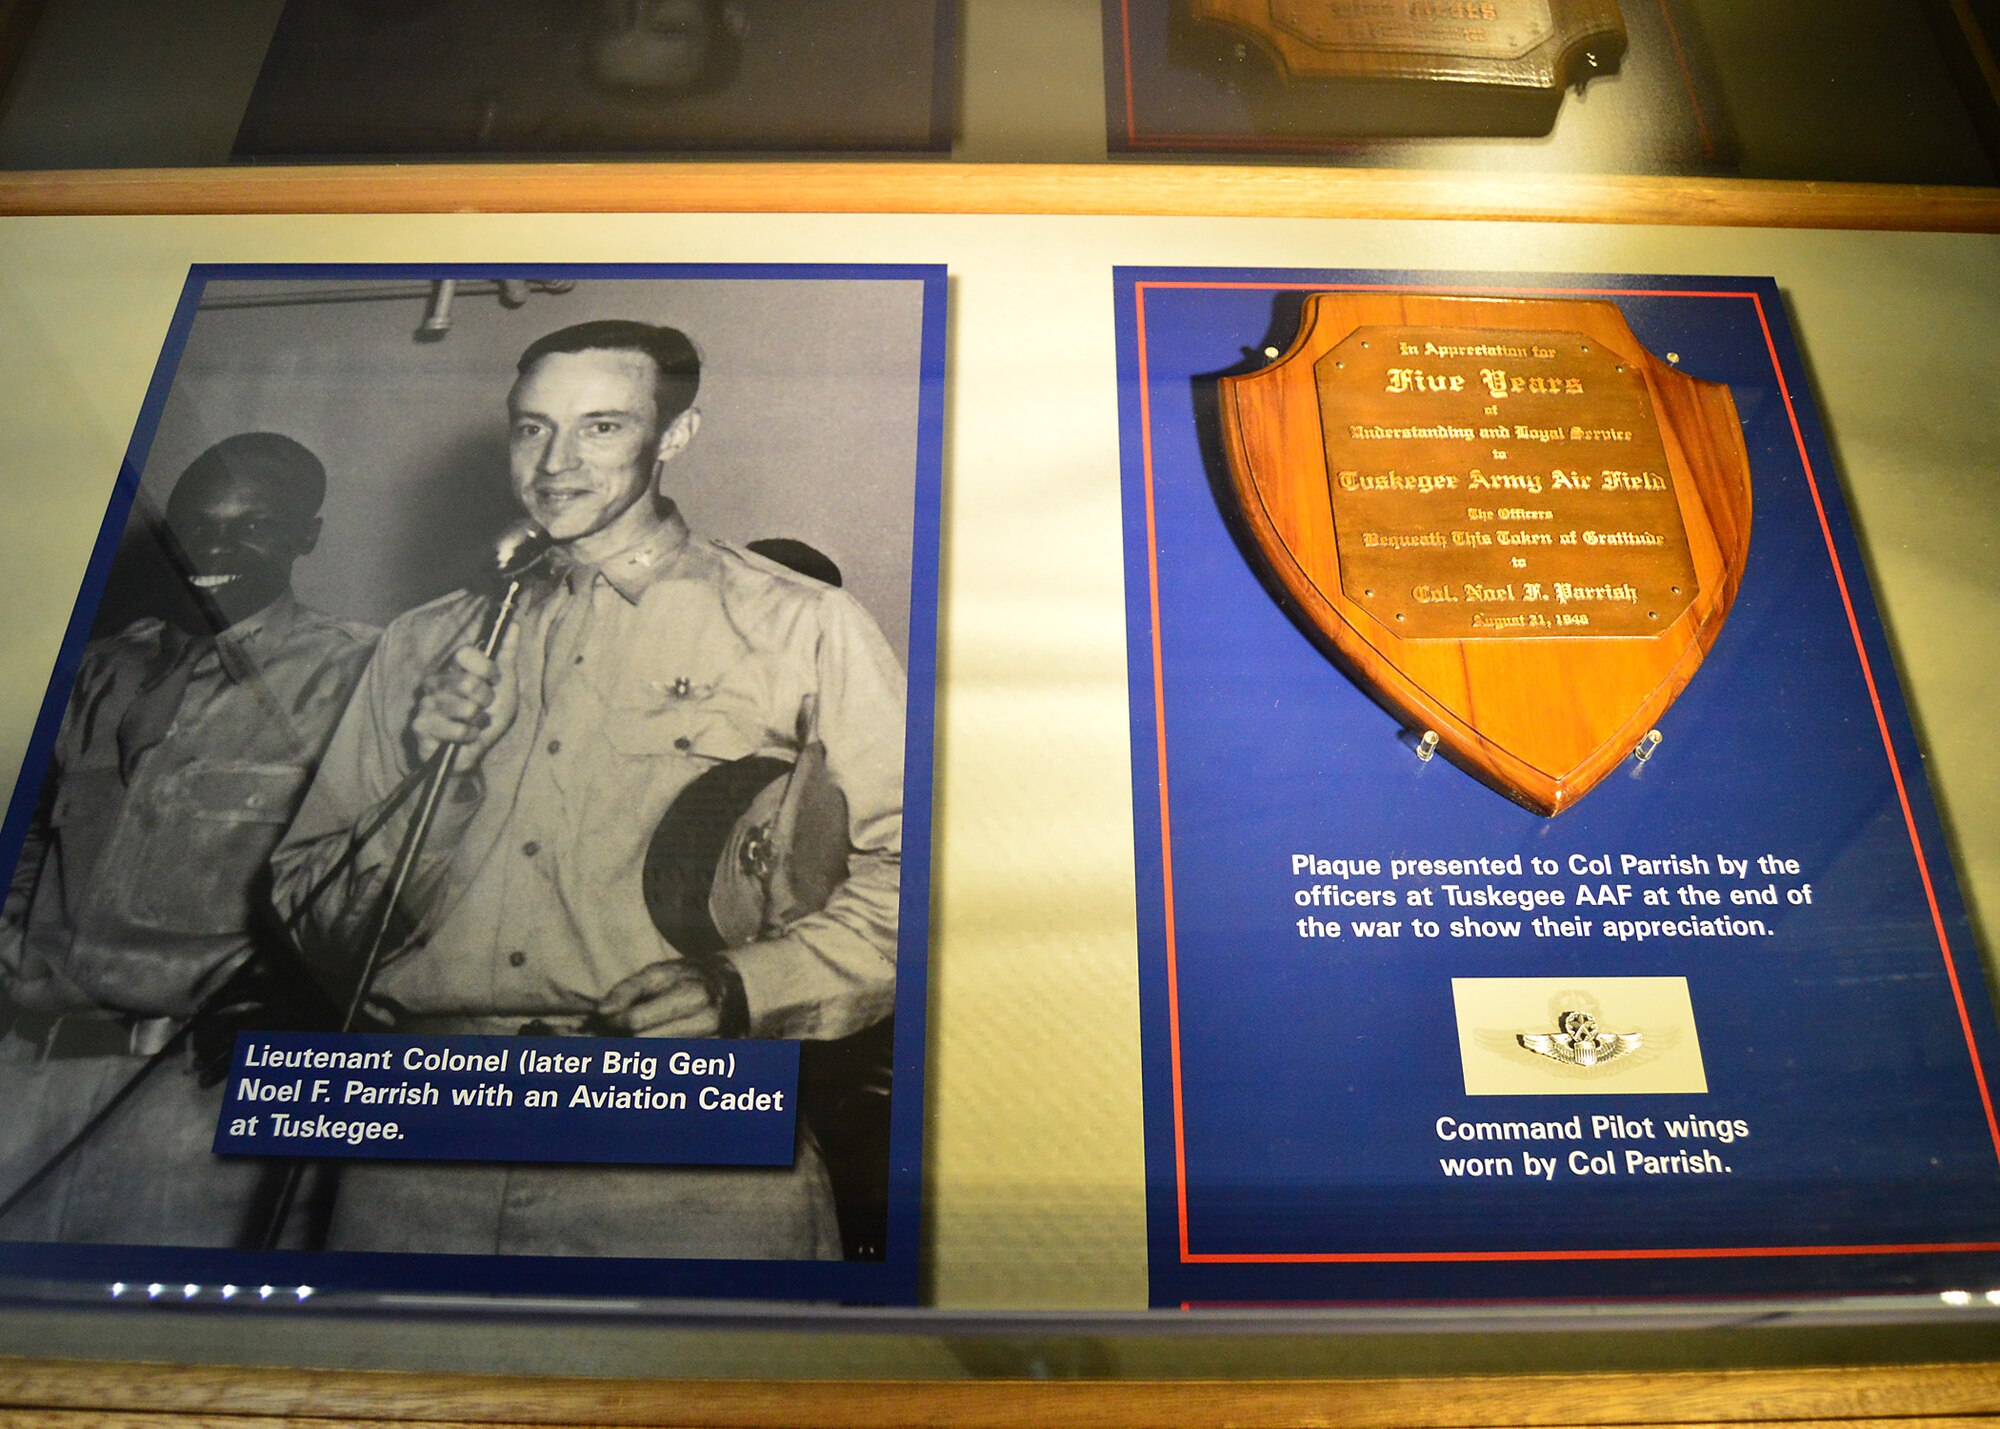 DAYTON, Ohio -- Lieutenant Colonel (later Brig Gen) Noel F. Parrish with an Aviation Cadet at Tuskegee. Also on display are his Command Pilot wings, and a plaque presented to Col Parrish by the officers at Tuskegee AAF at the end of the war to show their appreciation. This display is located in the Tuskegee Airmen Exhibit in the WWII Gallery at the National Museum of the U.S. Air Force. (U.S. Air Force photo)